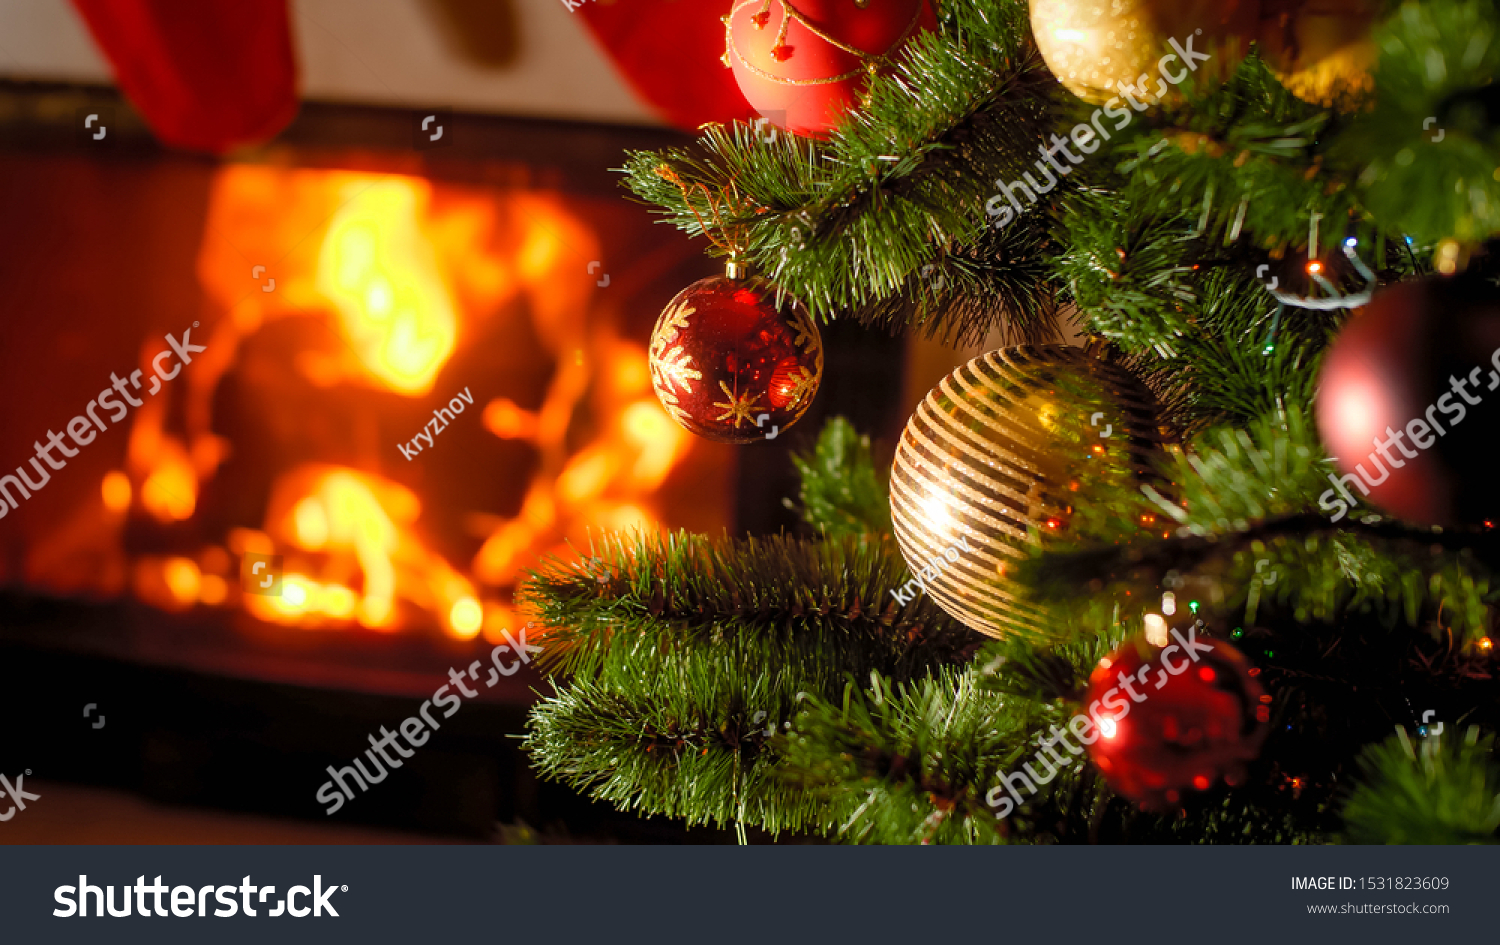 Background of burning fireplace and decorated Christmas tree with baubles and garlands #1531823609